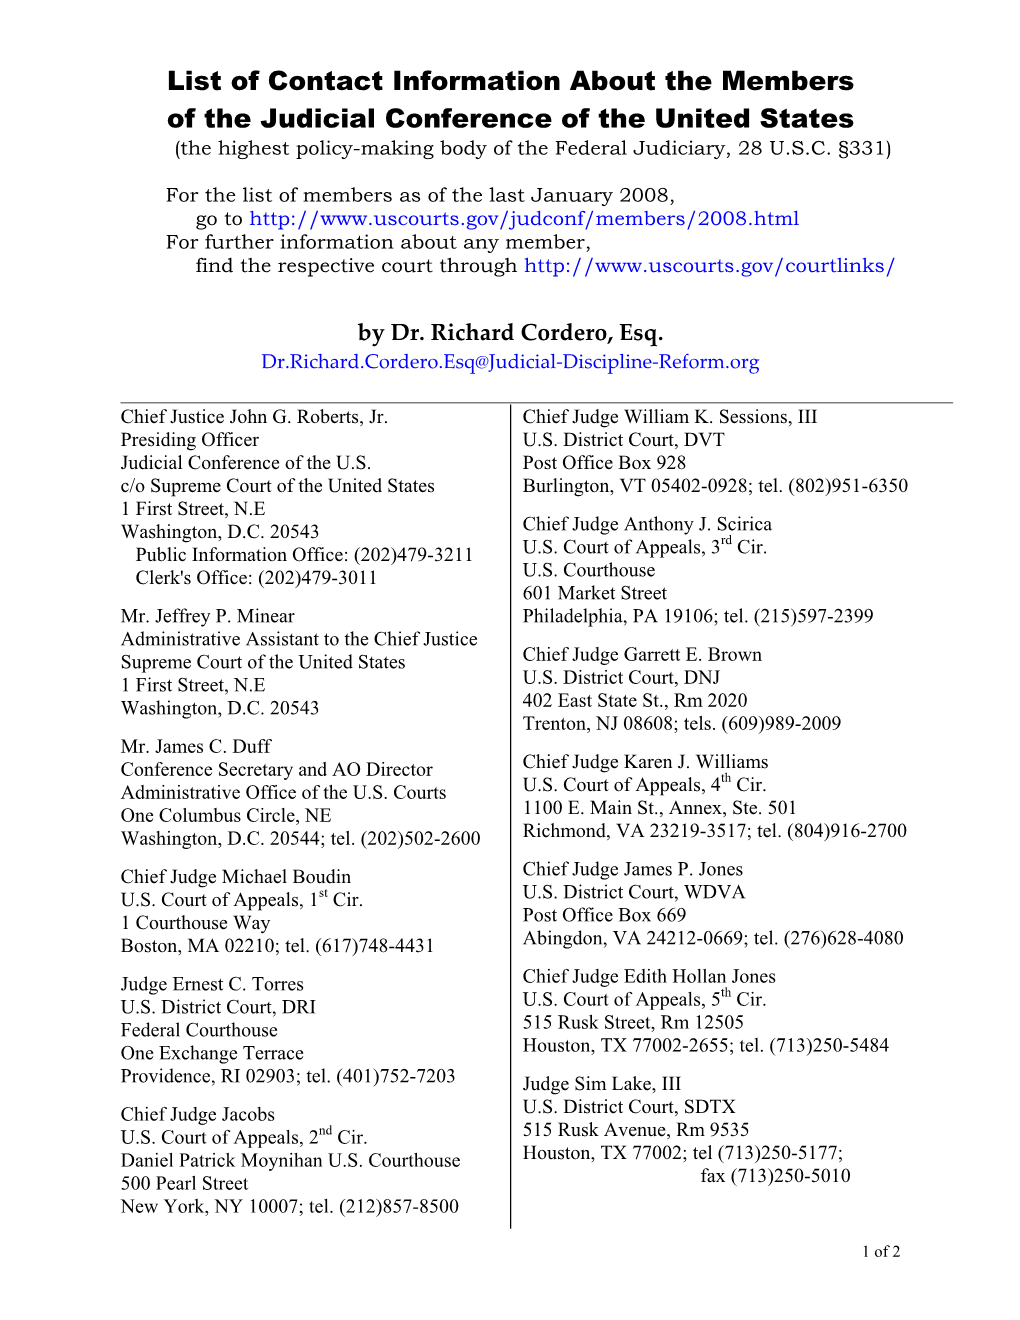 List of Contact Information About the Members of the Judicial Conference of the United States (The Highest Policy-Making Body of the Federal Judiciary, 28 U.S.C